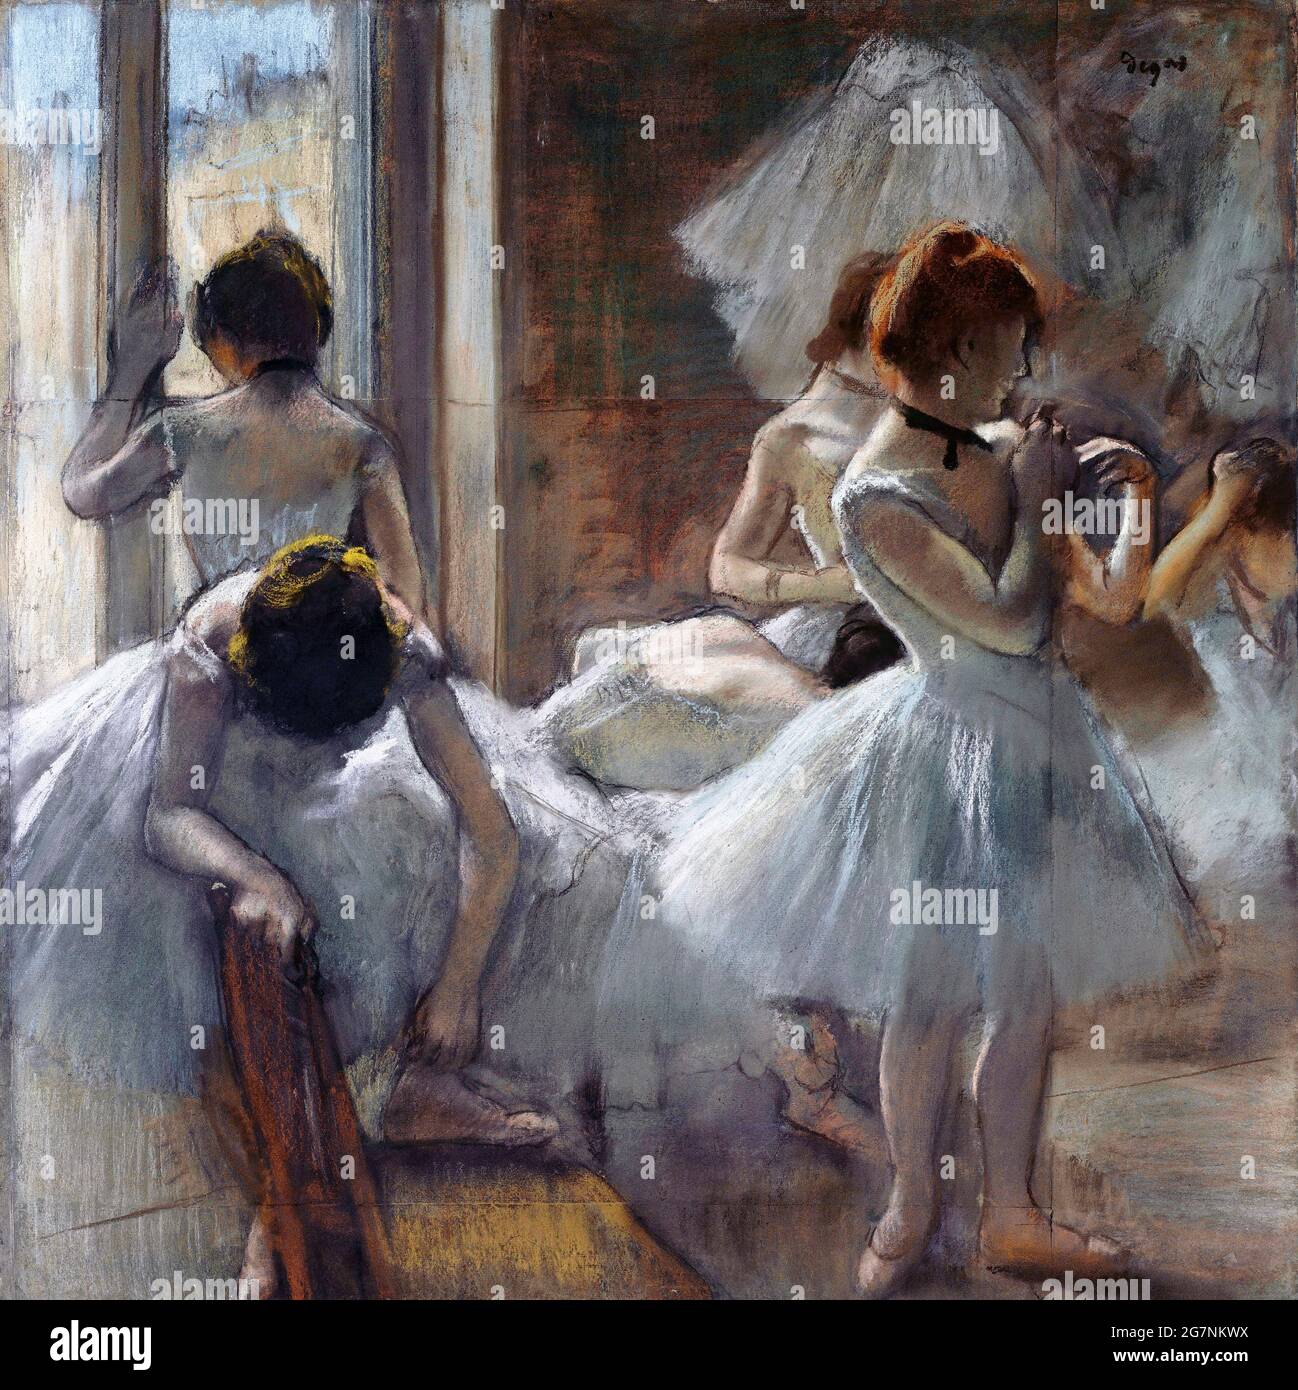 Degas. Painting entitled 'The Dancers' by Edgar Degas (1834-1917), oil on canvas, 1884/5 Stock Photo